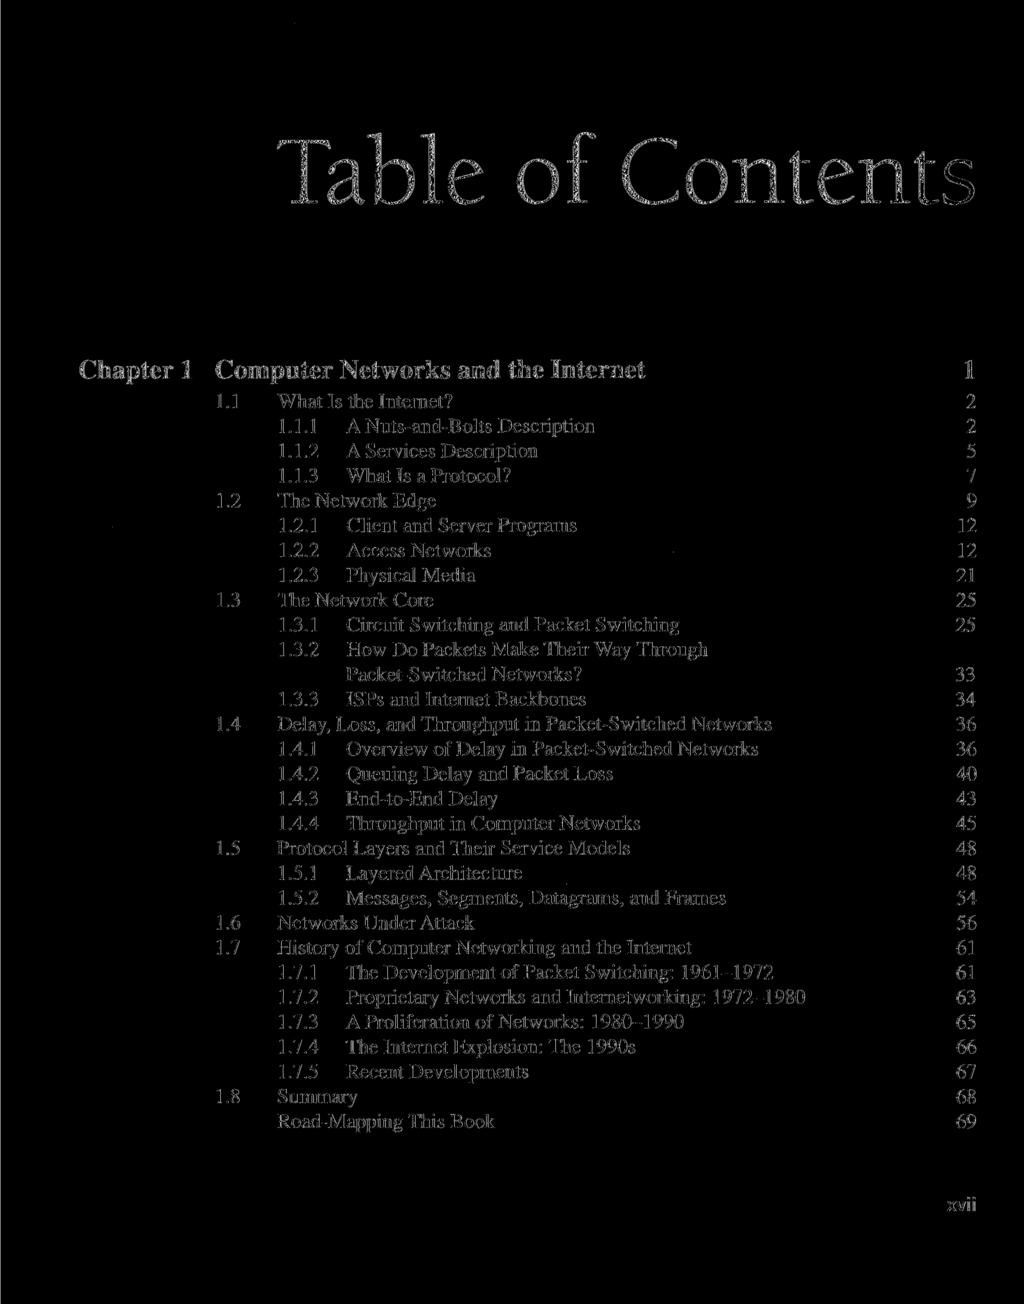 Table of Contents Chapter 1 Computer Networks and the Internet 1 1.1 What Is the Internet? 2 1.1.1 A Nuts-and-Bolts Description 2 1.1.2 A Services Description 5 1.1.3 What Is a Protocol? 7 1.